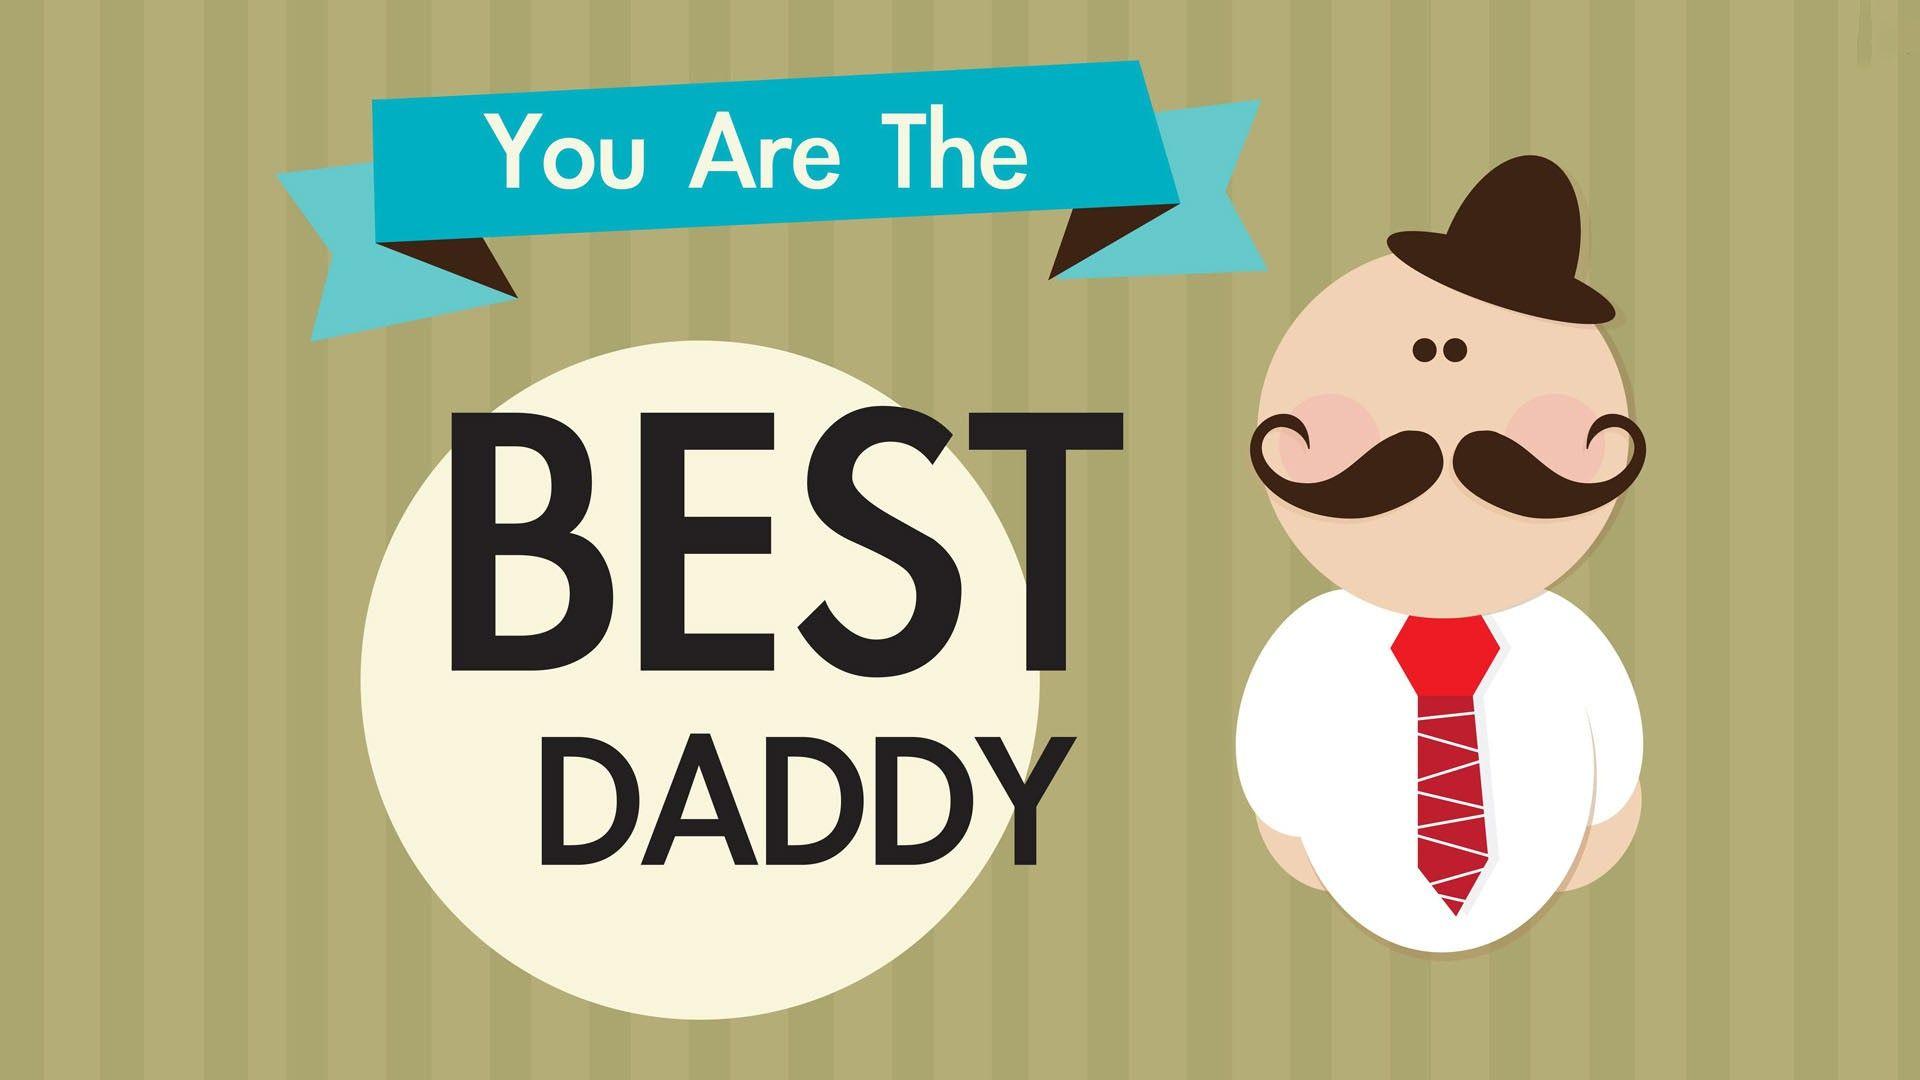 Happy Fathers Day 2017 Image for your Dad. Fathers day image